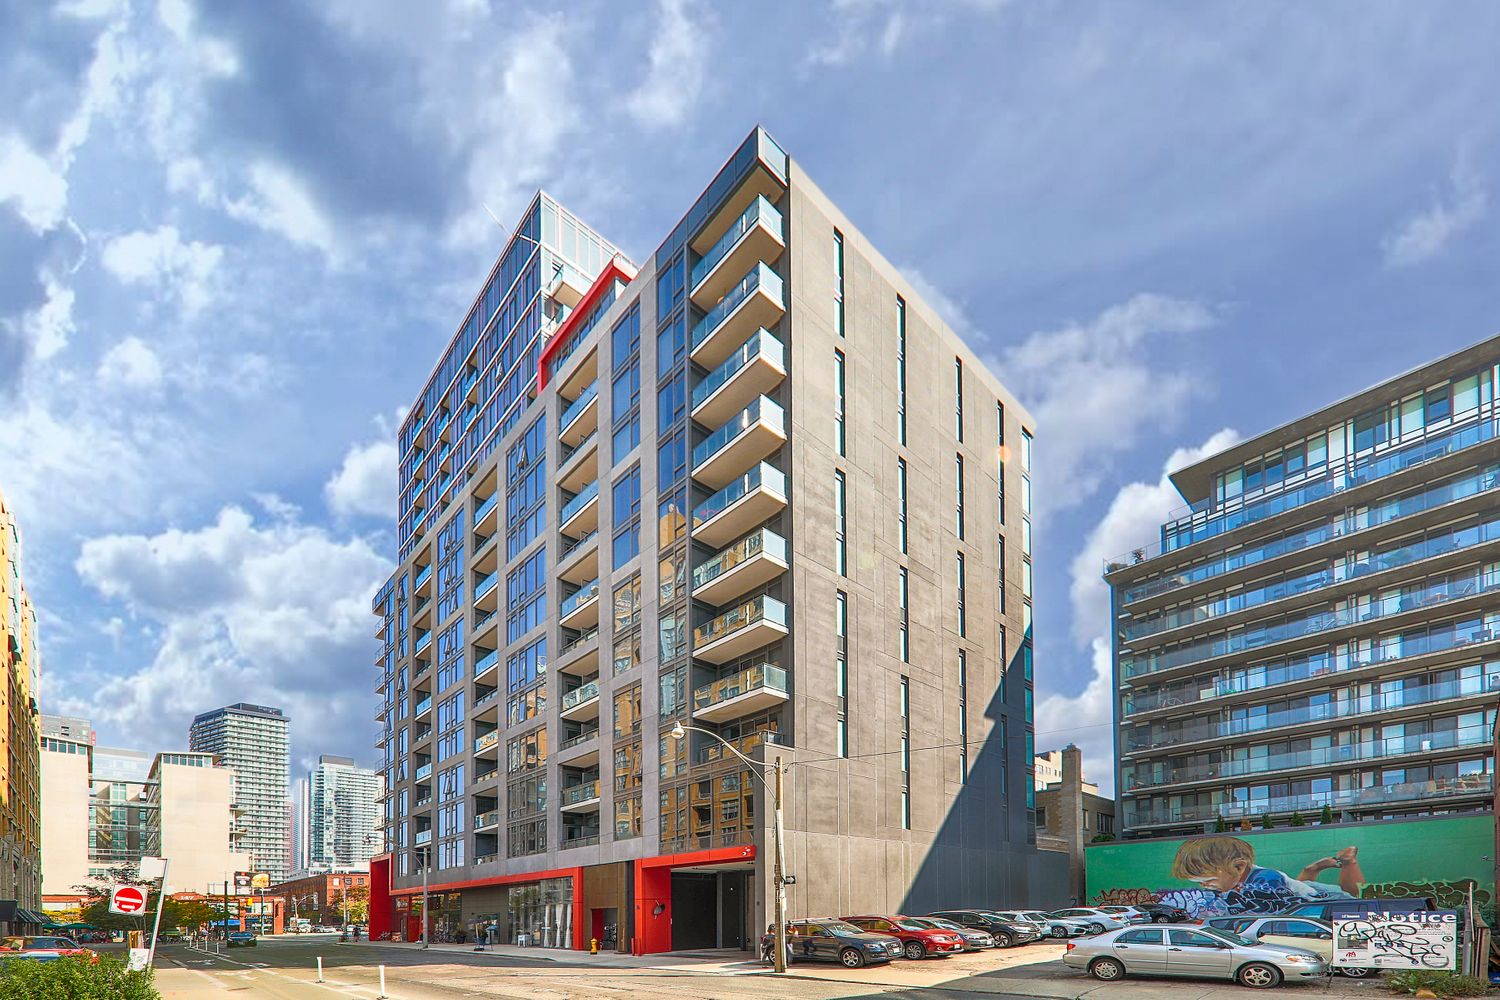 435 Richmond Street W. Fabrik Condos is located in  Downtown, Toronto - image #1 of 5